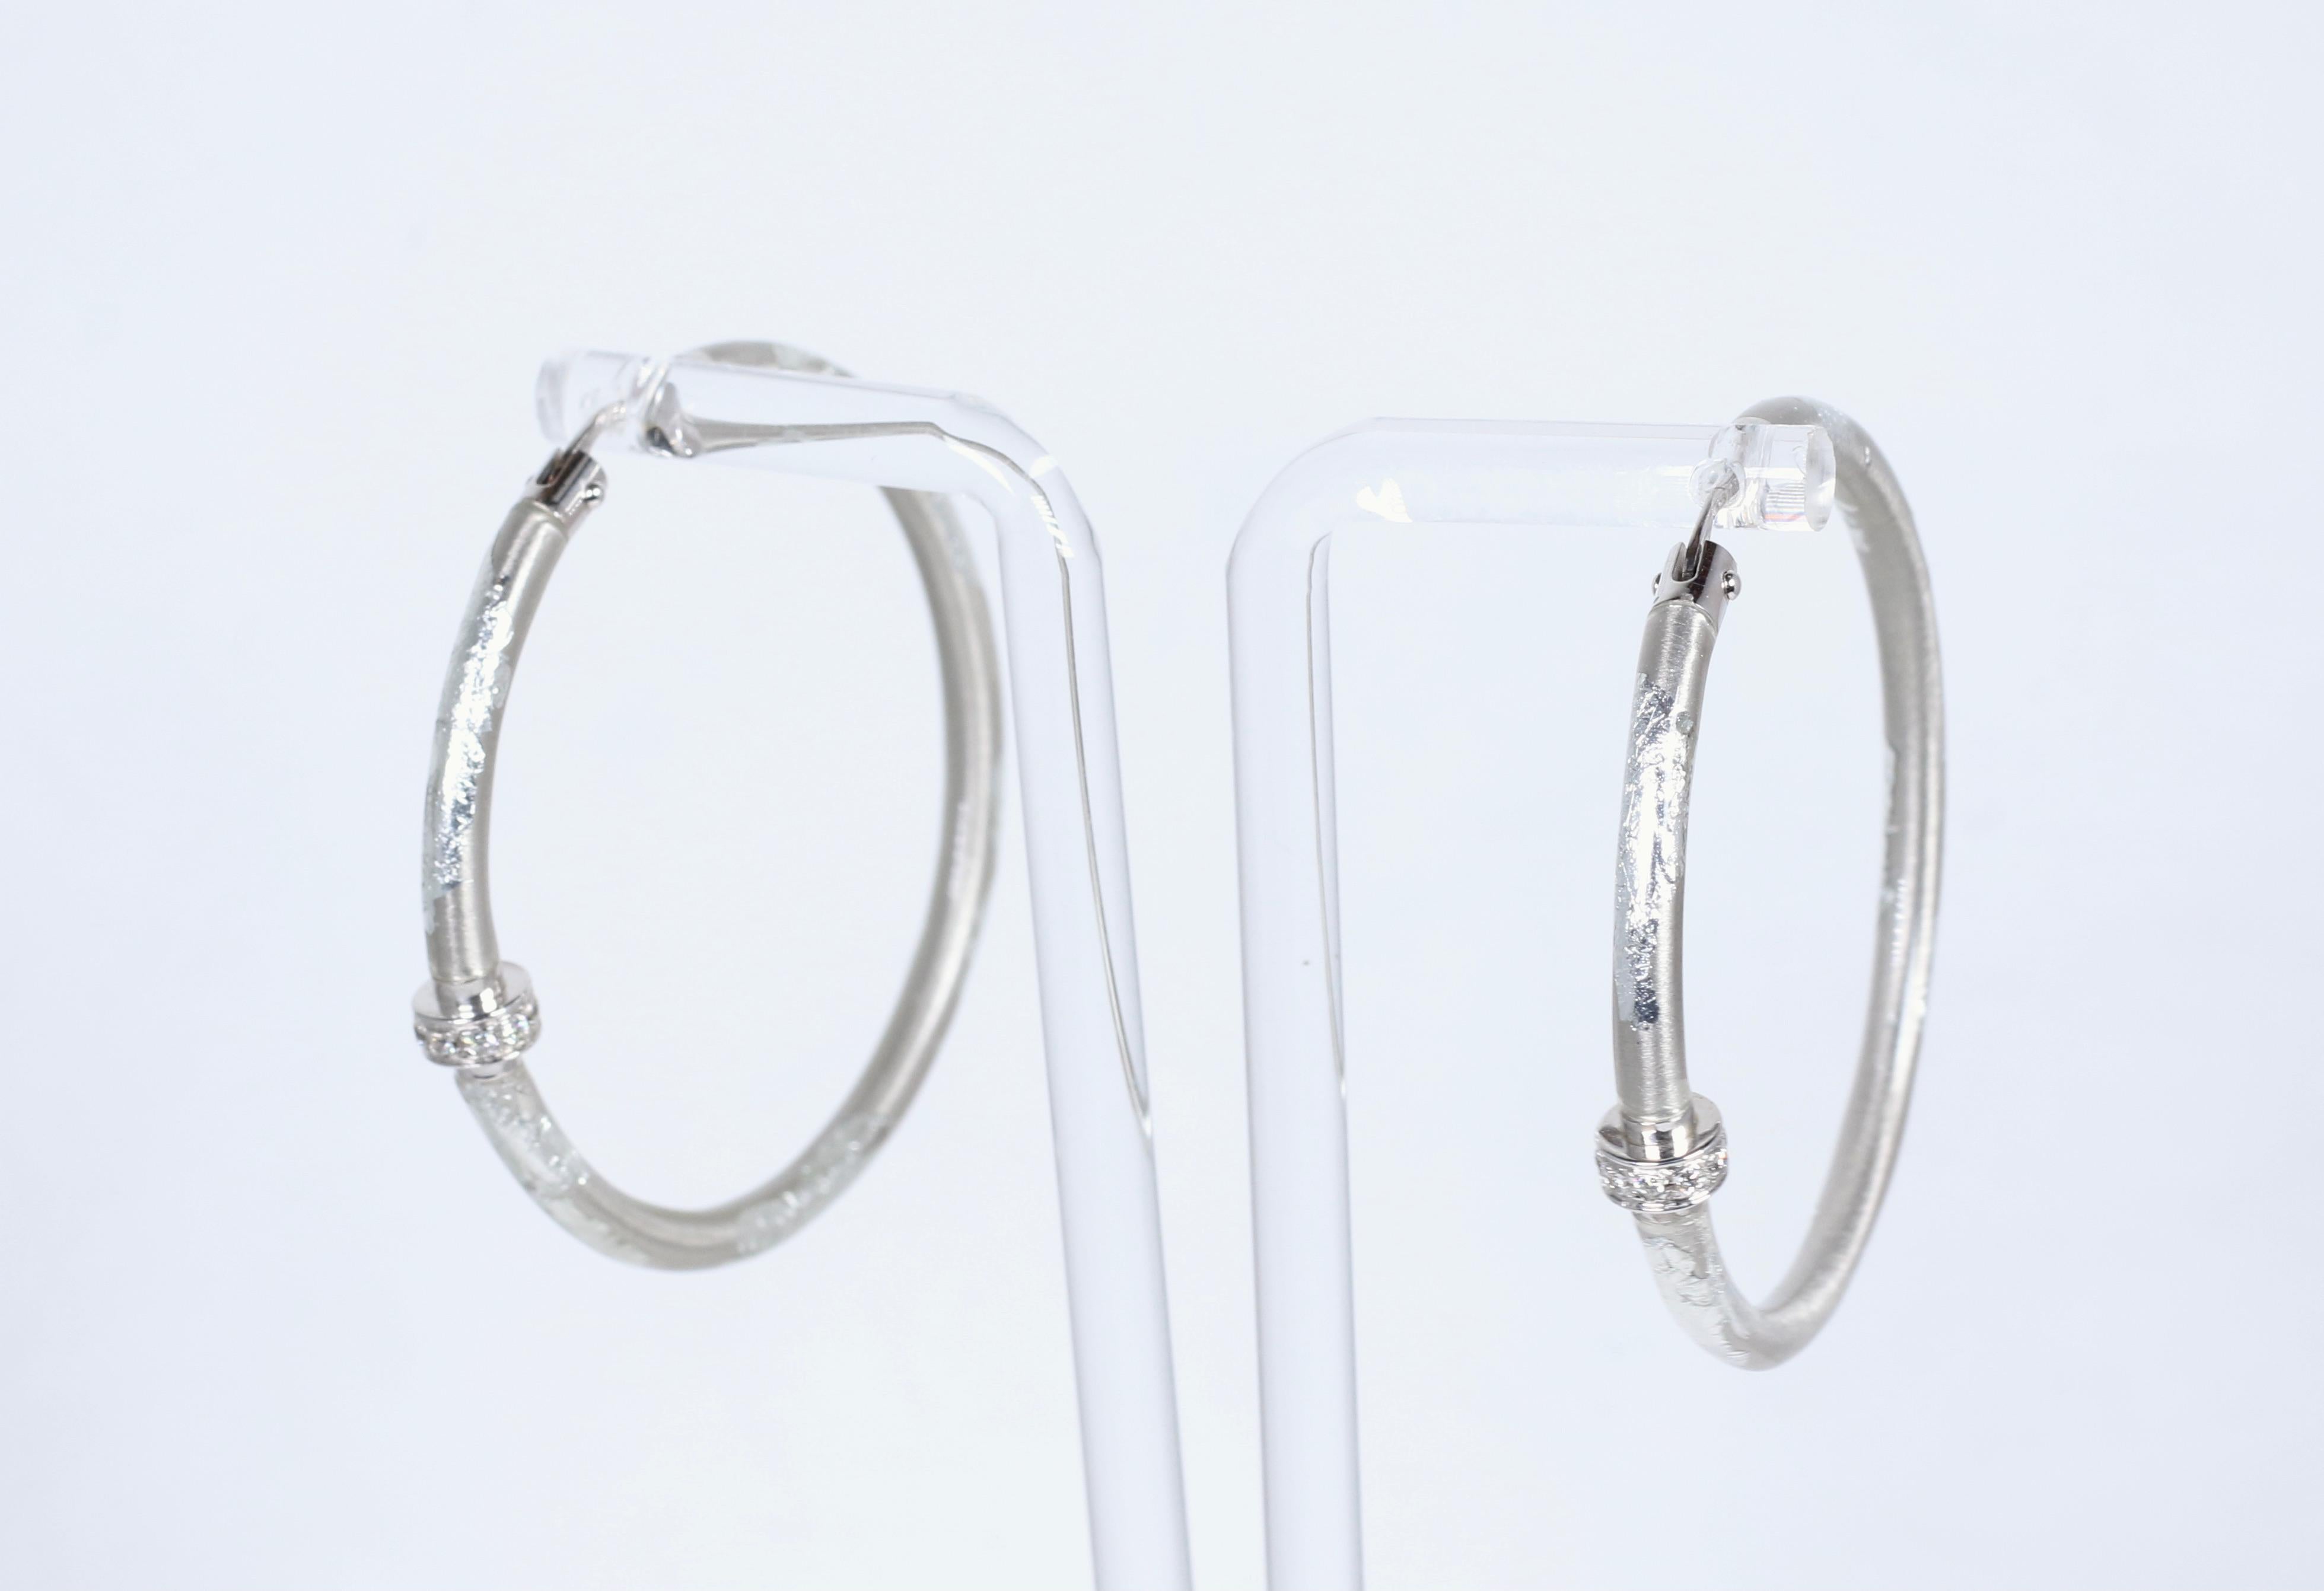 These Sterling Silver and Enamel hoops from SOHO come set with .14ctw of diamonds